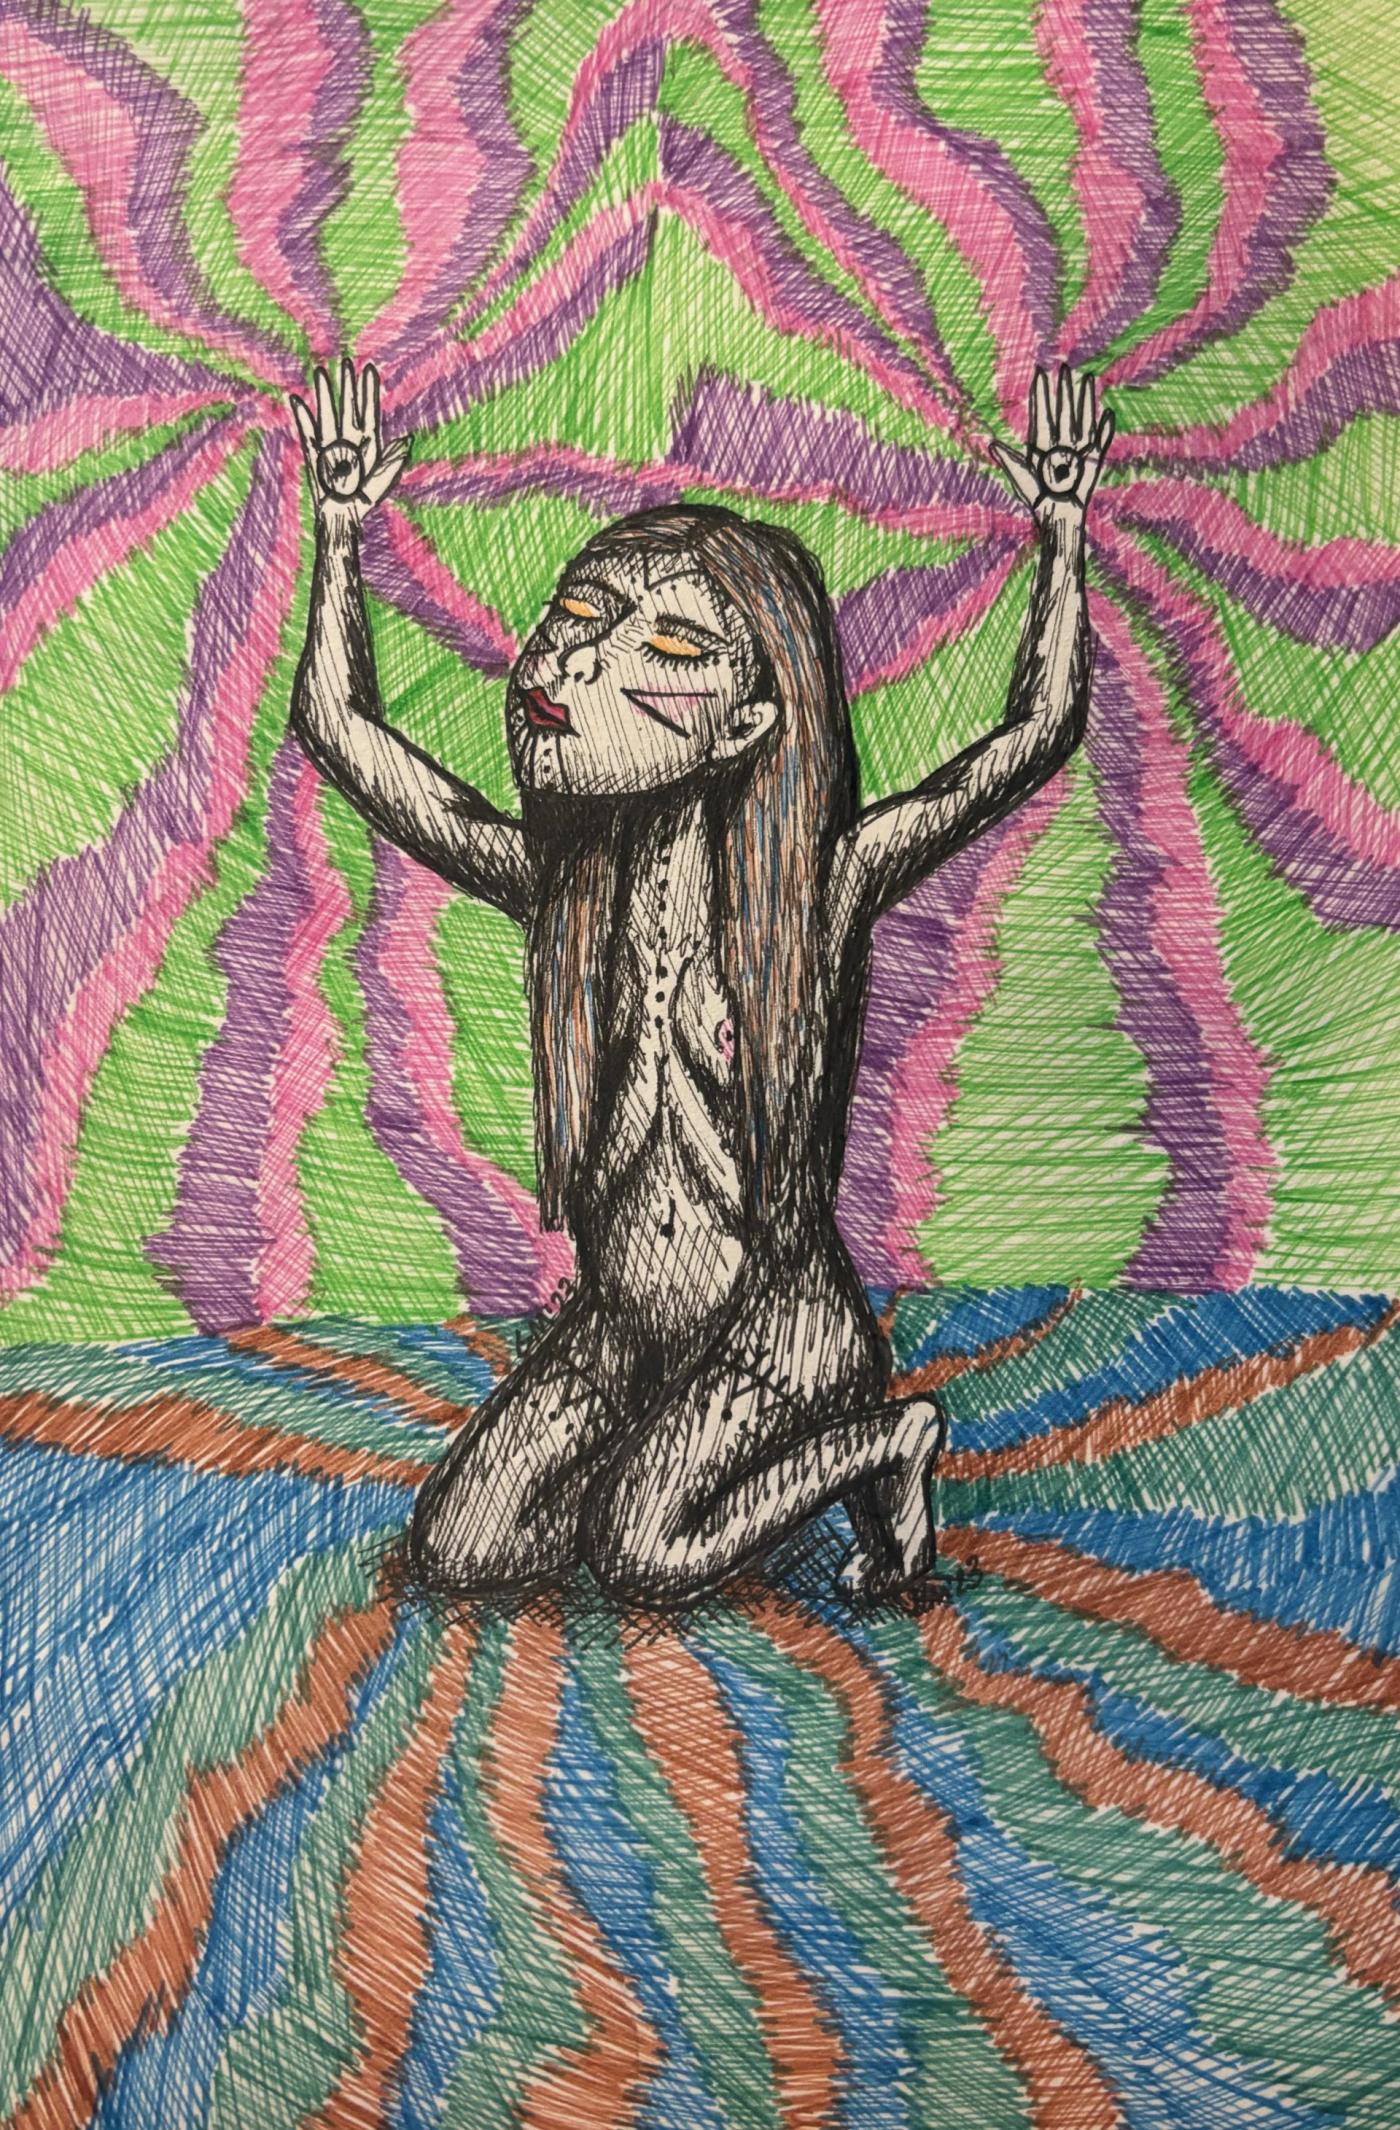 Pen and paper drawing of a woman bearing traditional tattoos. Below her are swirling colors of the land, while above are swirling colors of the northern lights.